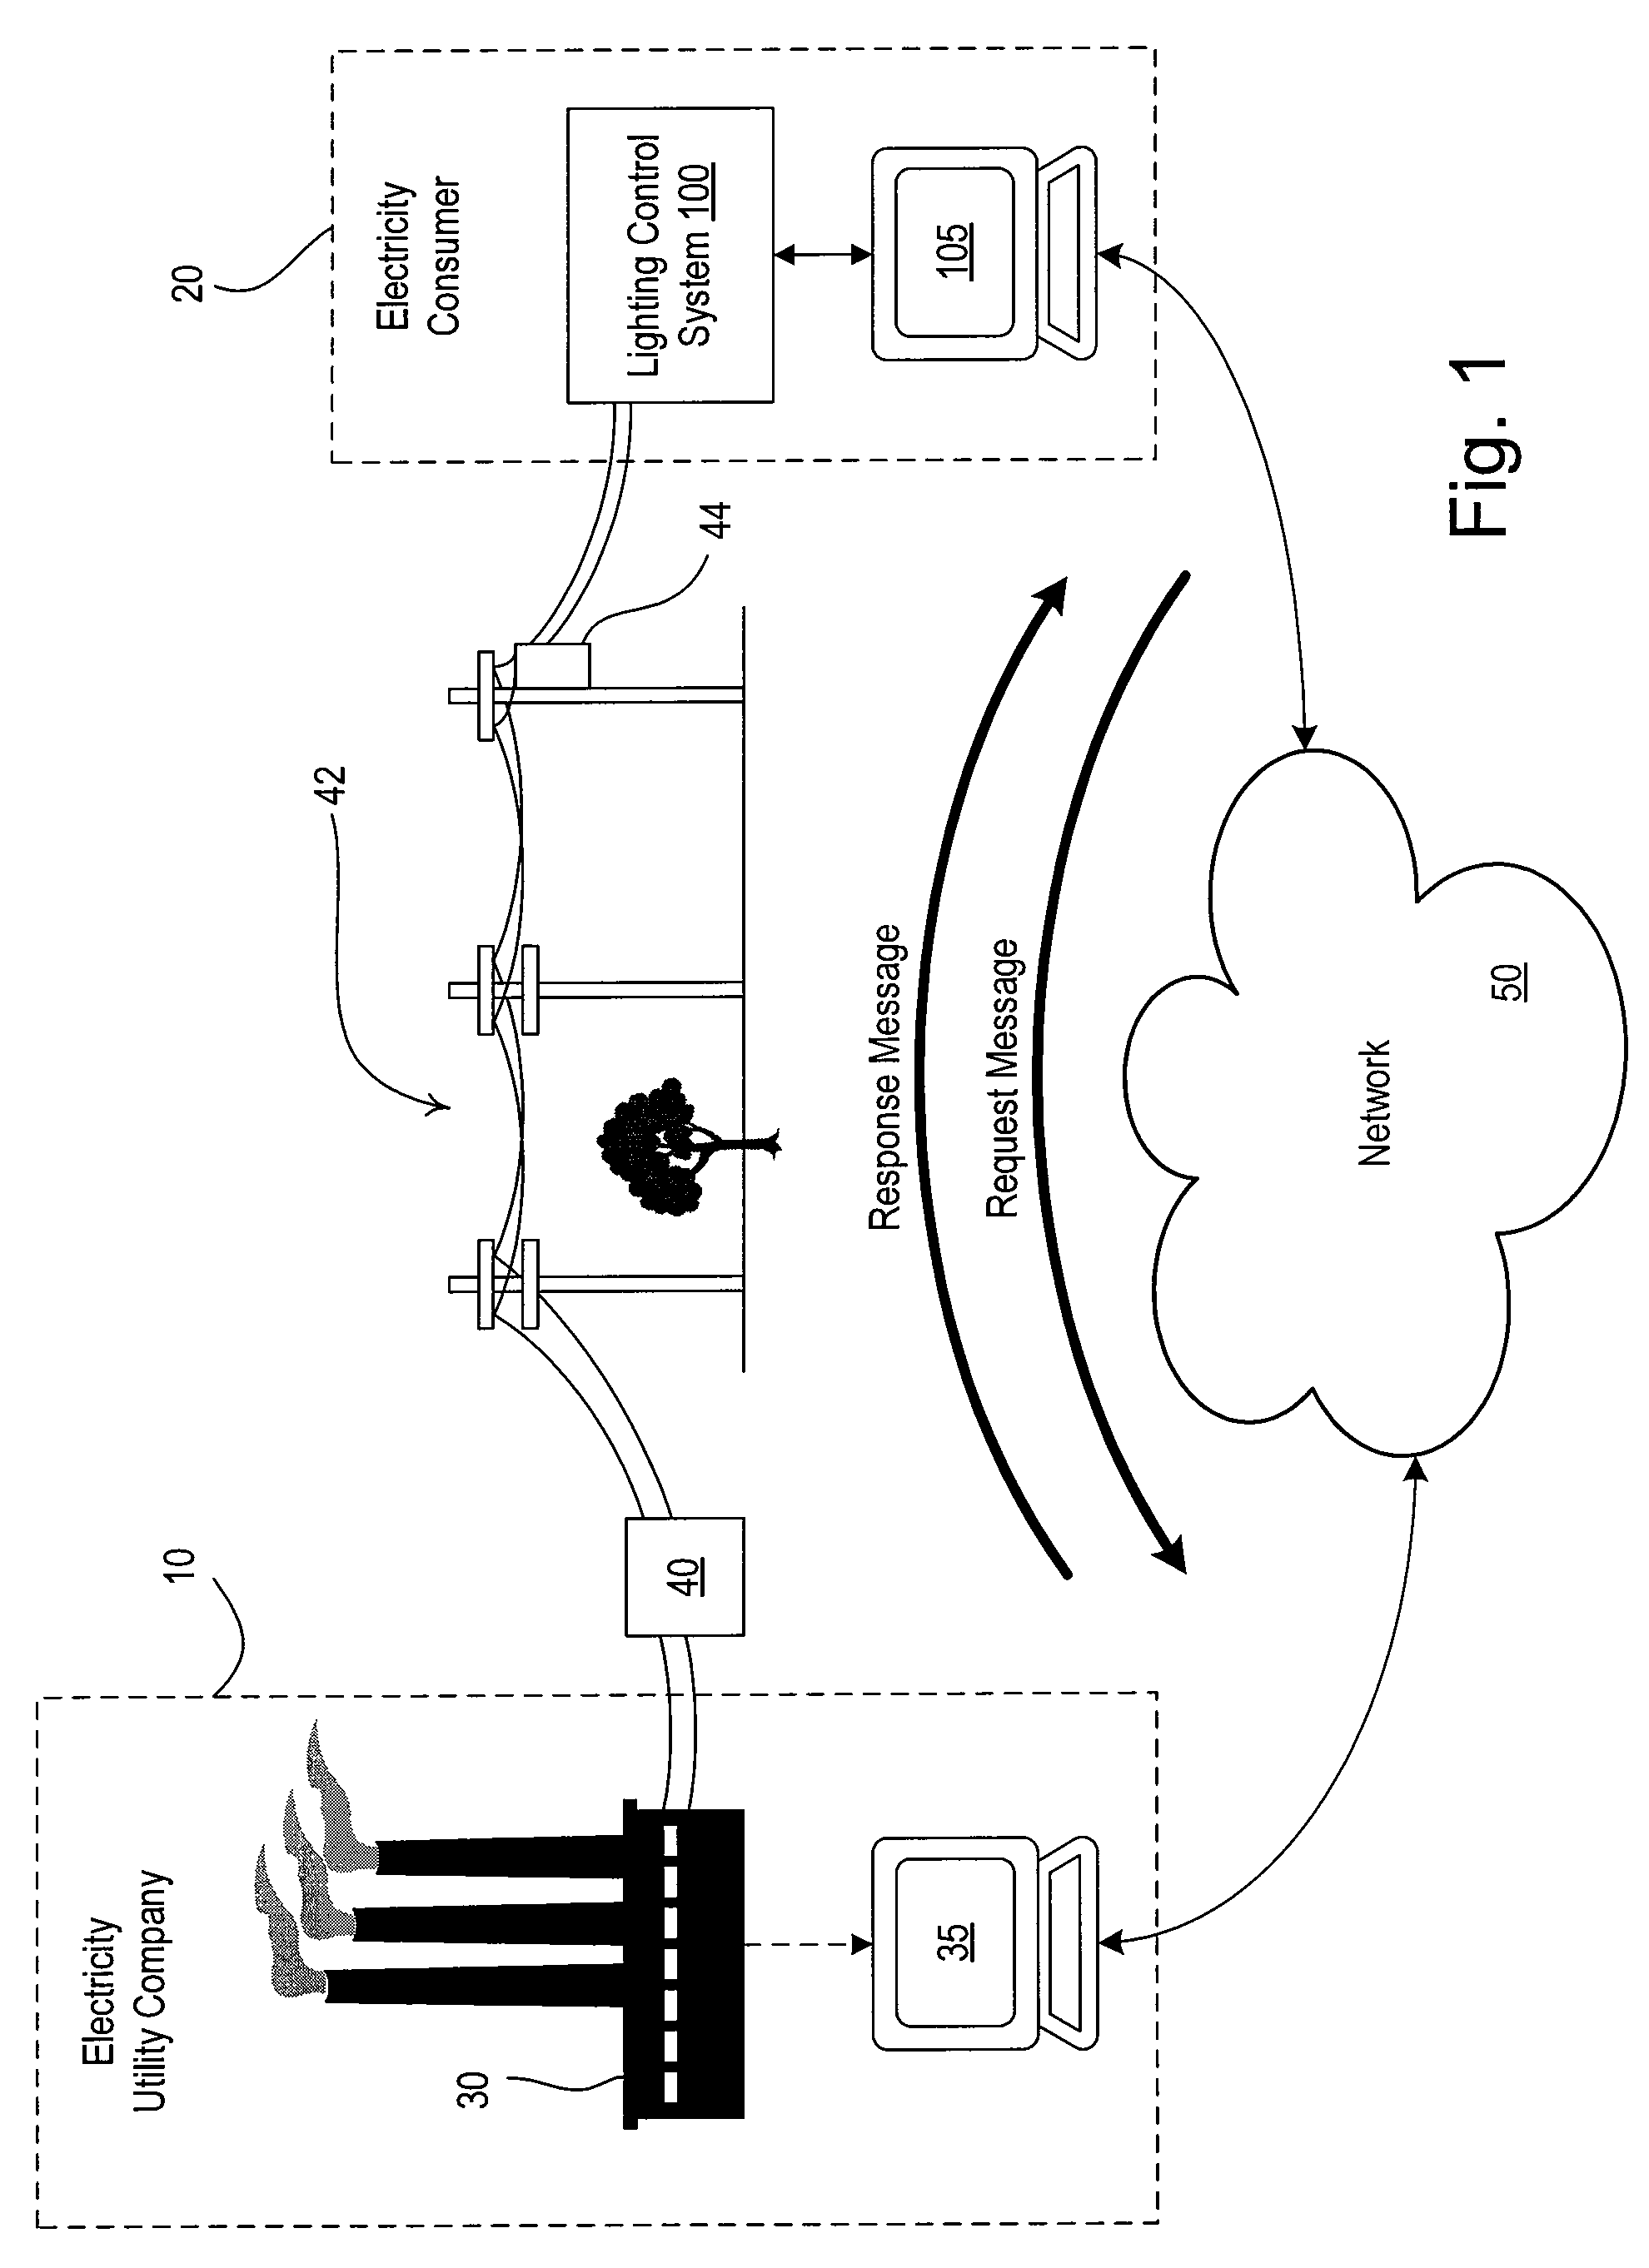 Method of communicating a command for load shedding of a load control system